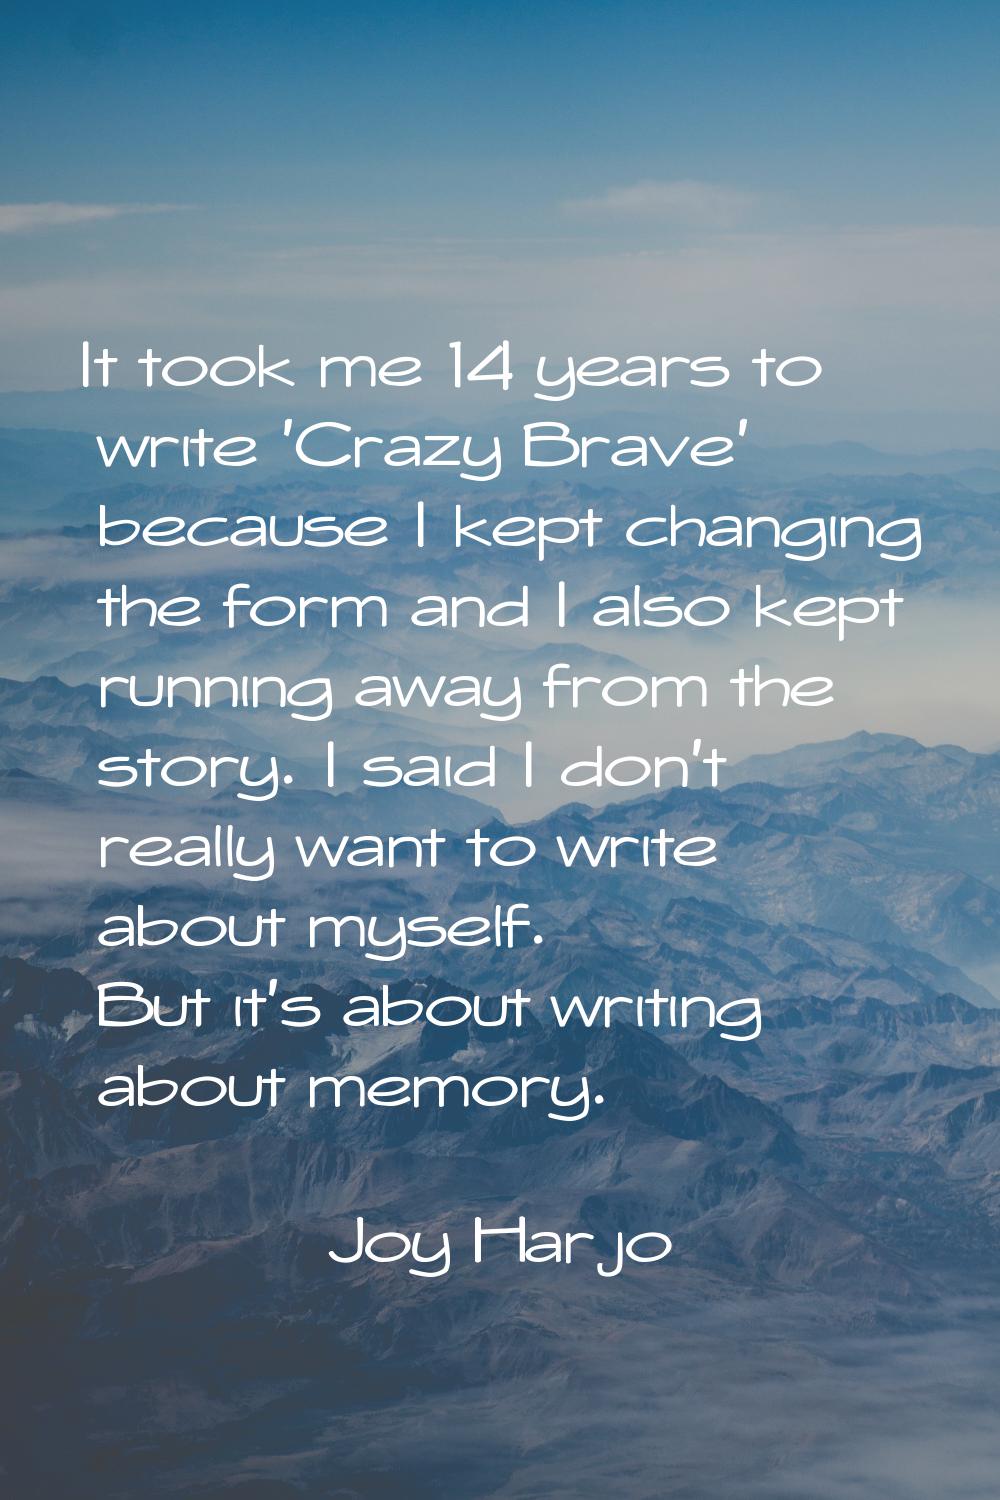 It took me 14 years to write 'Crazy Brave' because I kept changing the form and I also kept running